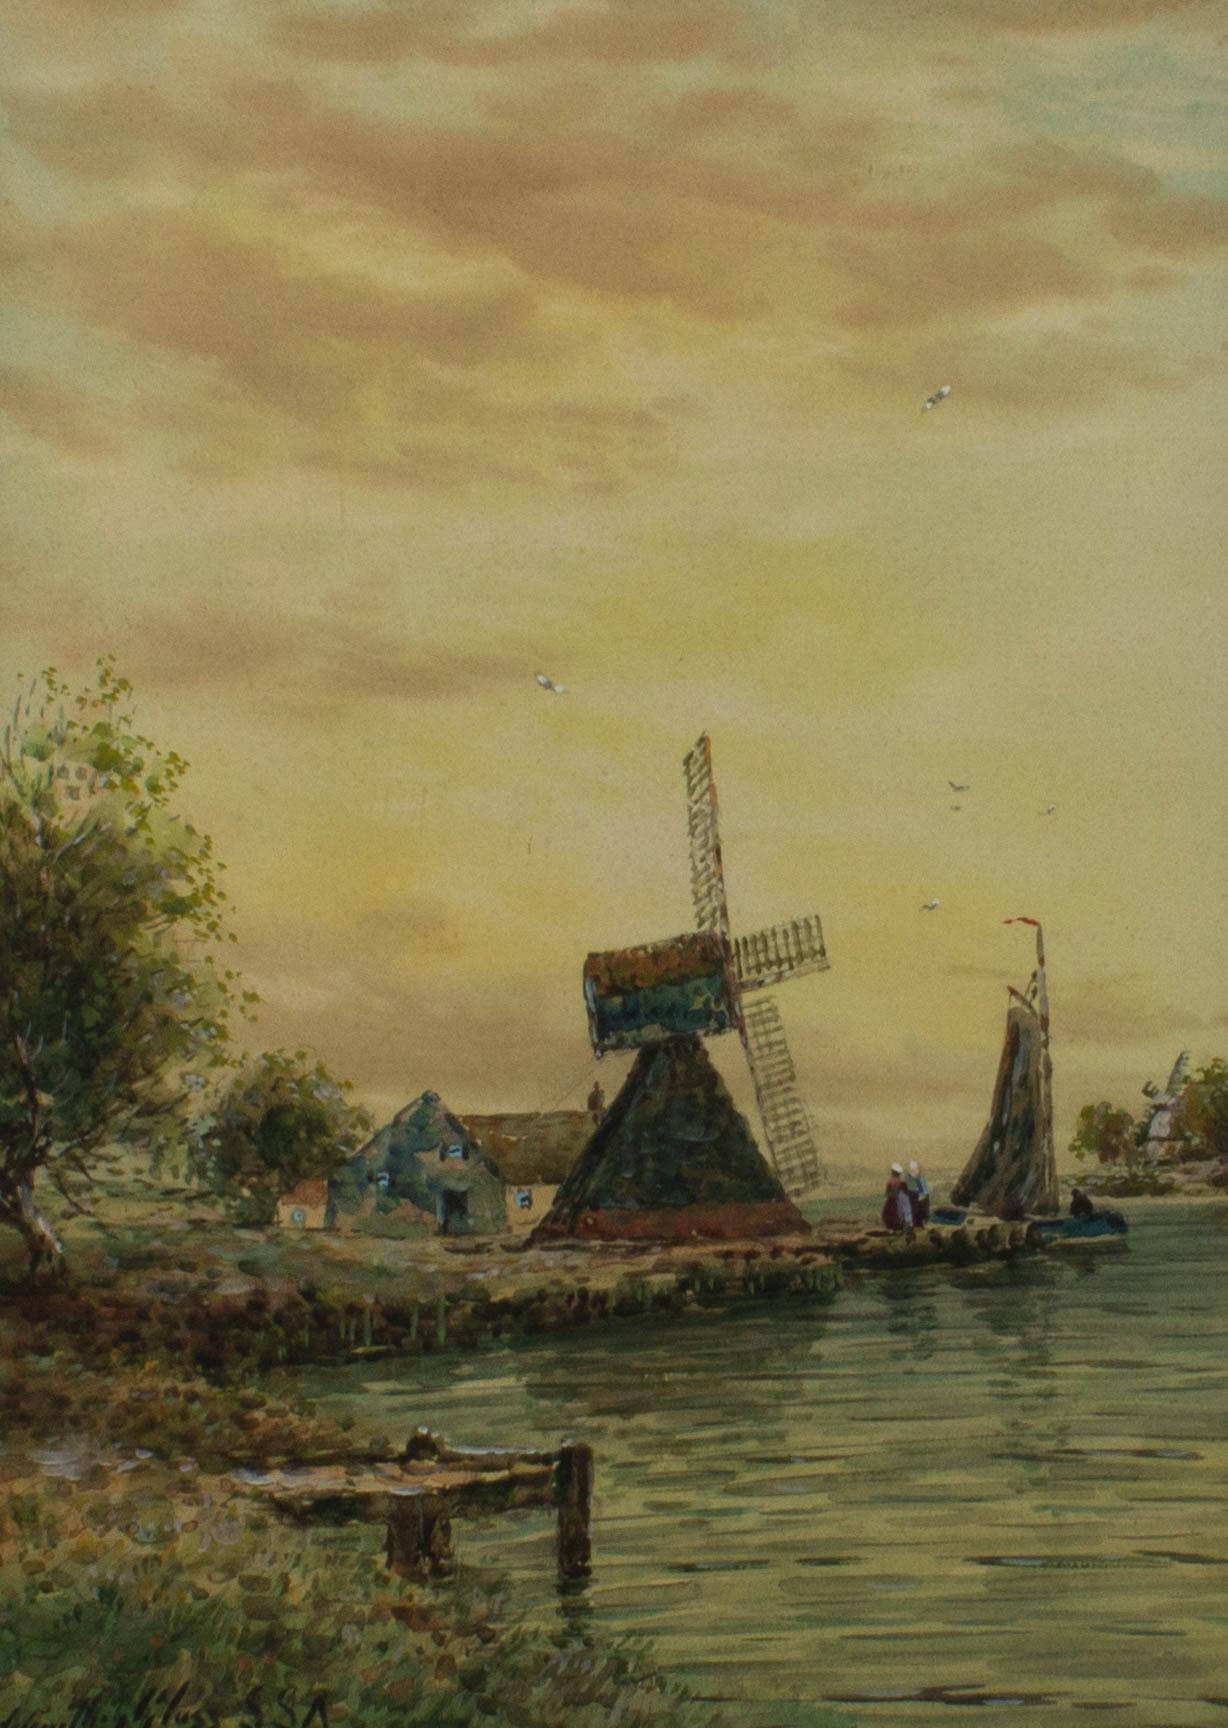 A landscape depicting a windmill on a riverbank. Presented glazed in an ornate gilt-effect frame with swept corners. Signed to the lower-left edge. On watercolour paper.
